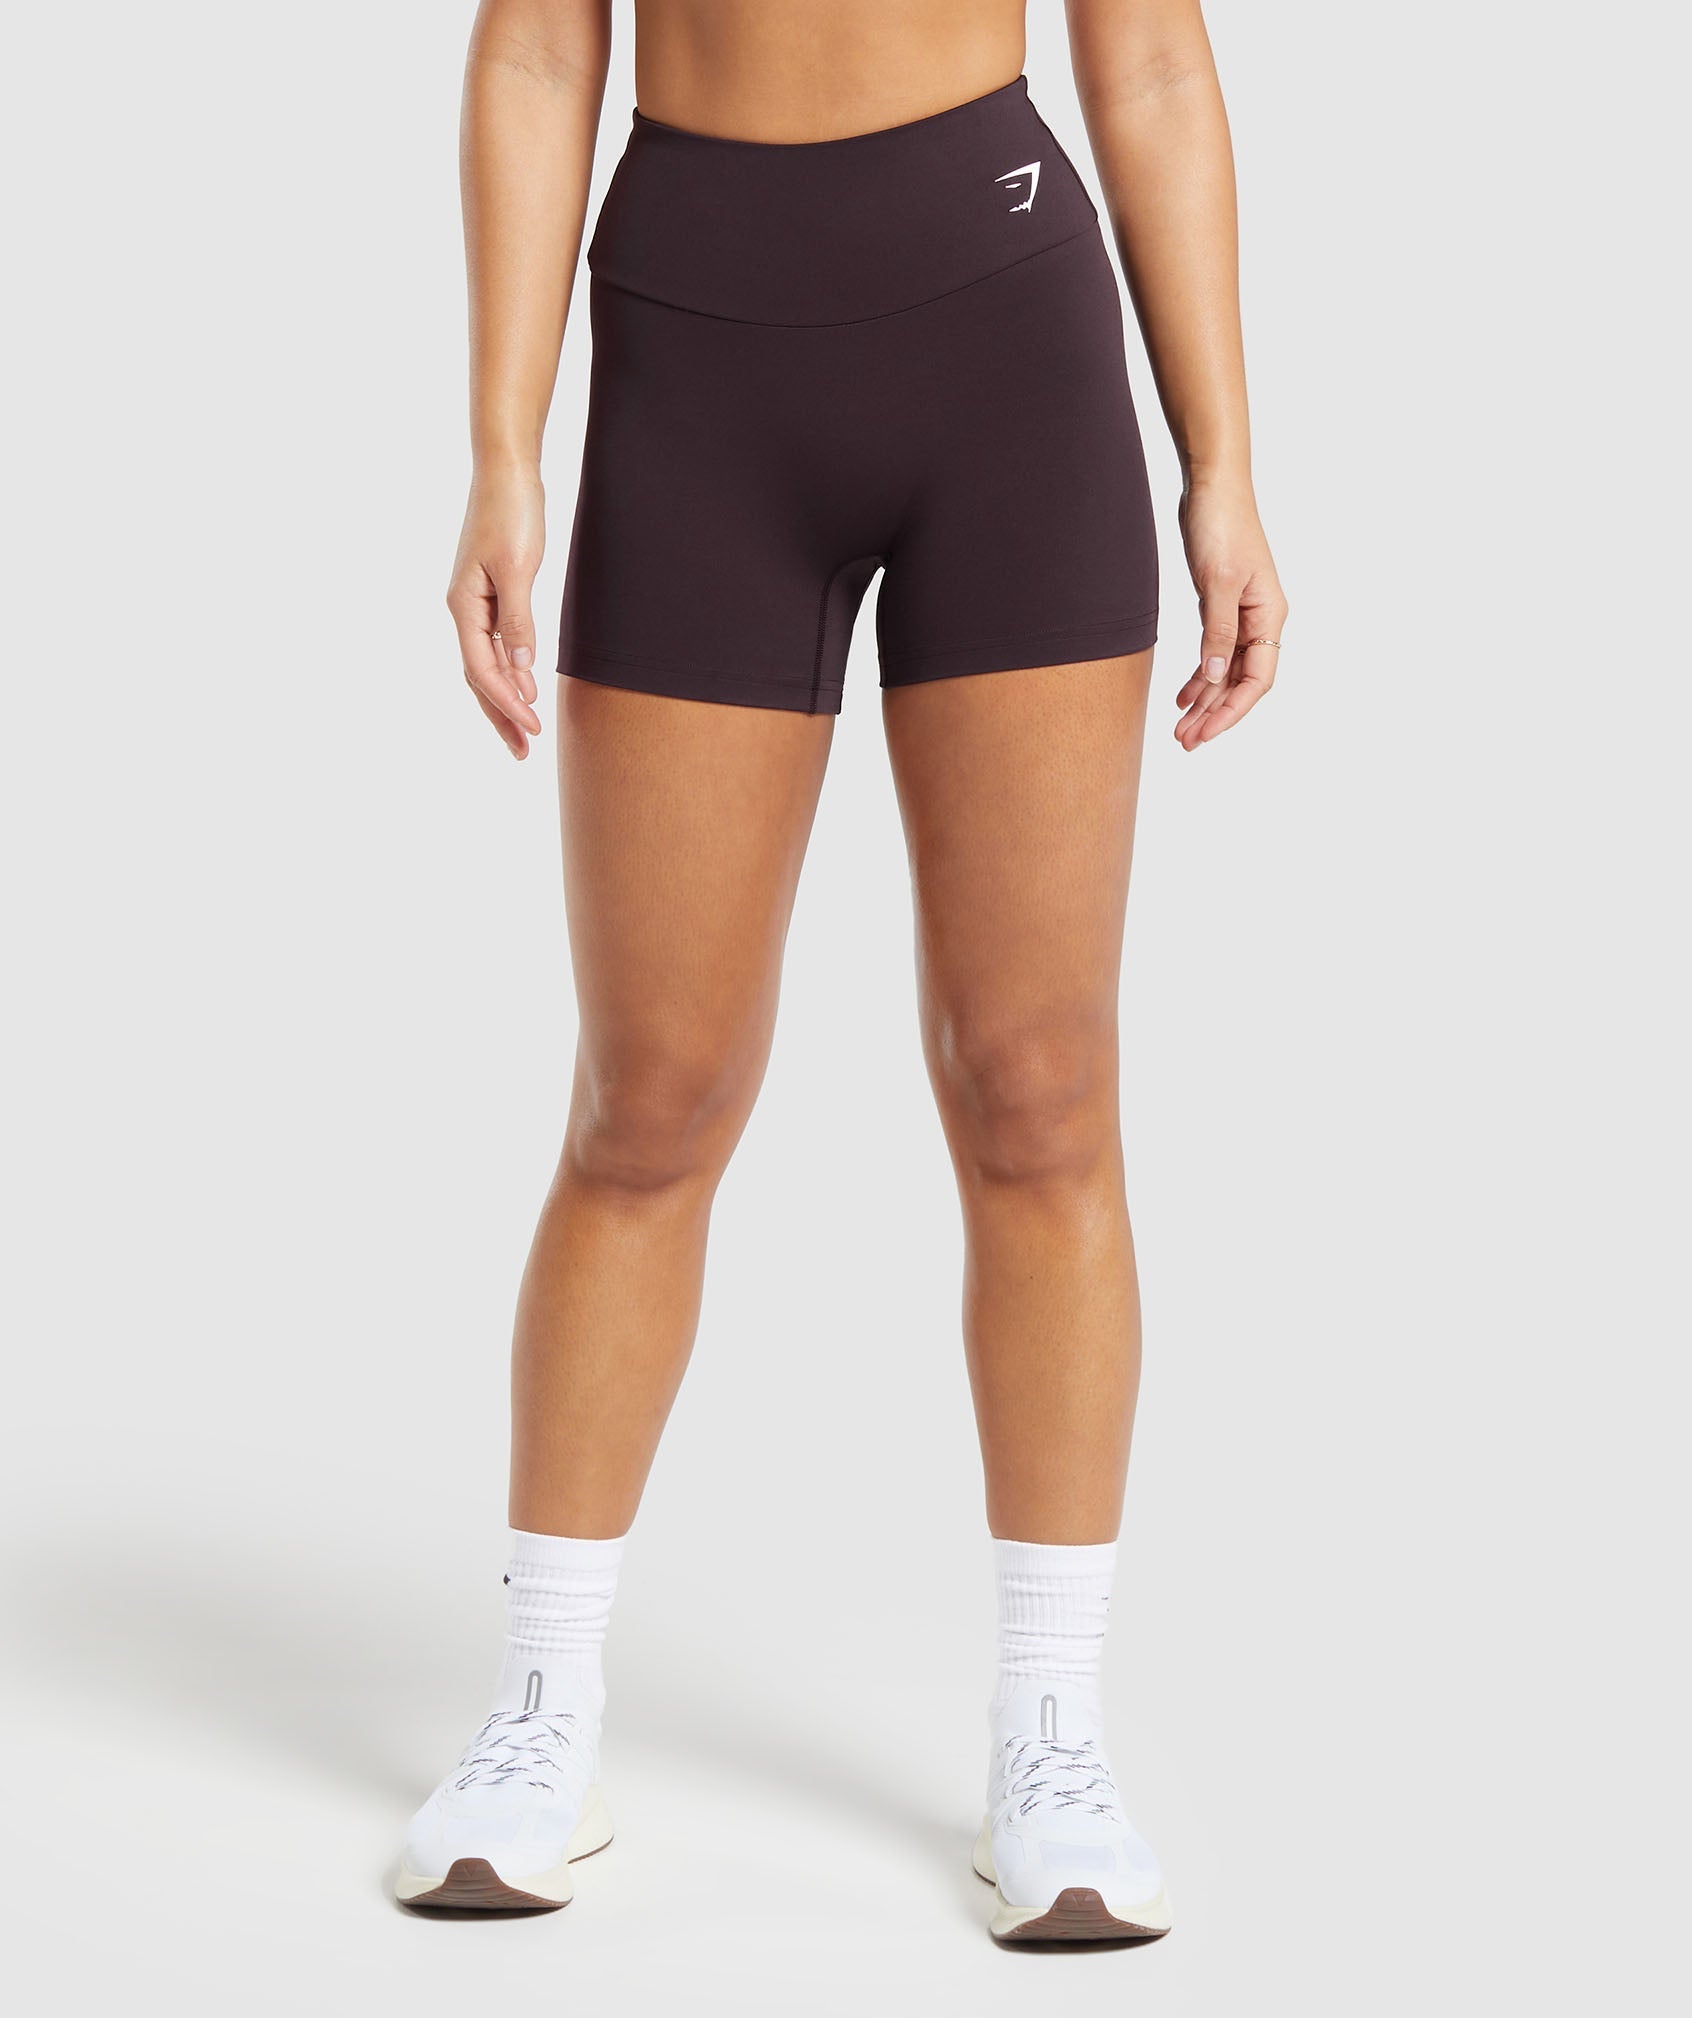 Training Tight Shorts in Plum Brown